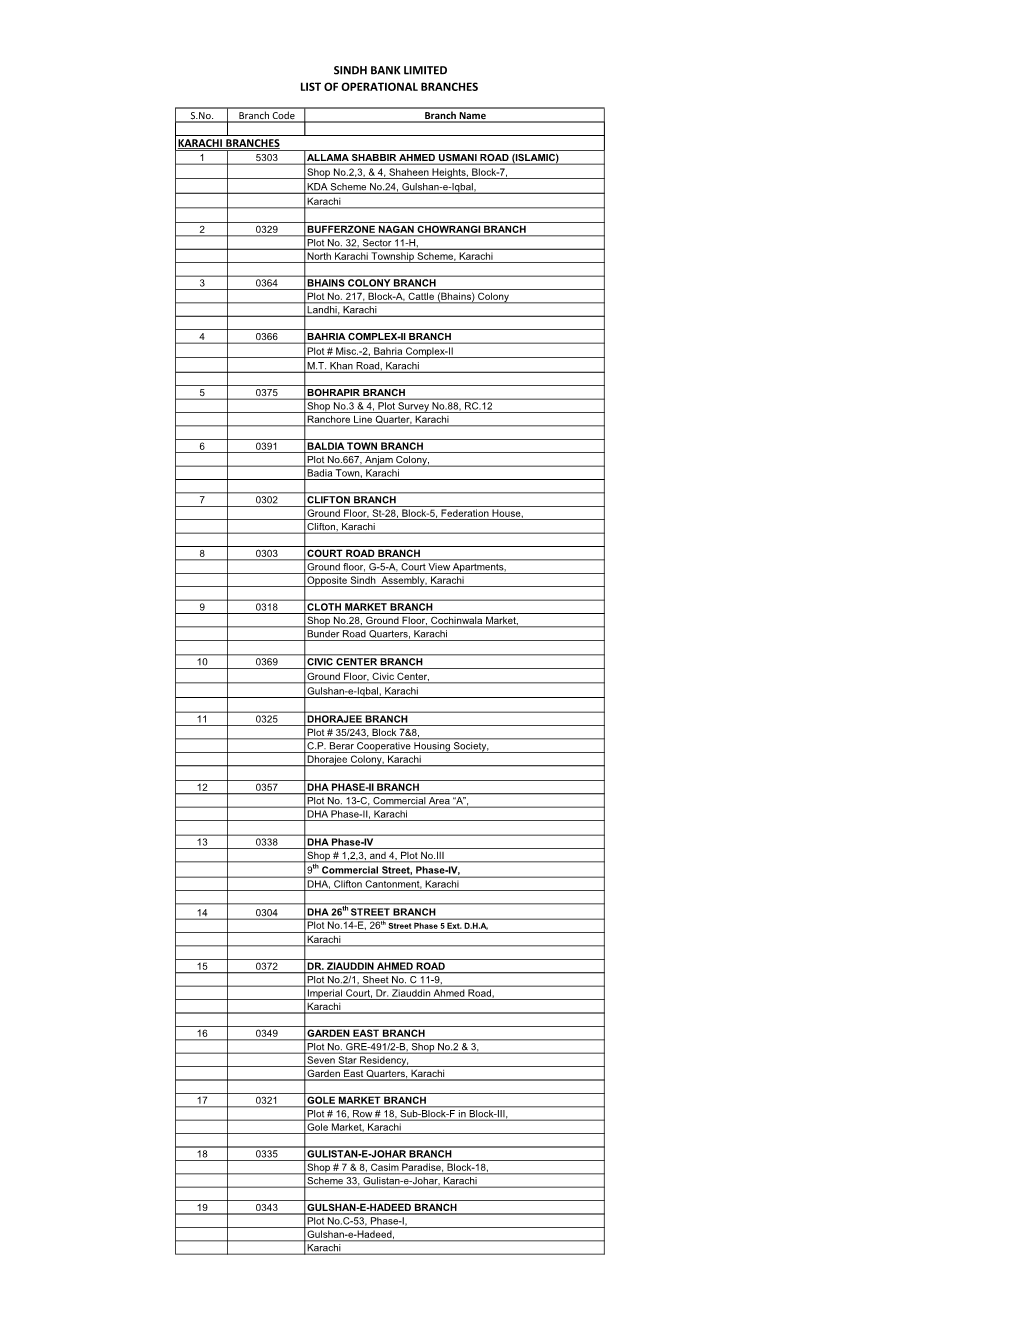 Sindh Bank Limited List of Operational Branches